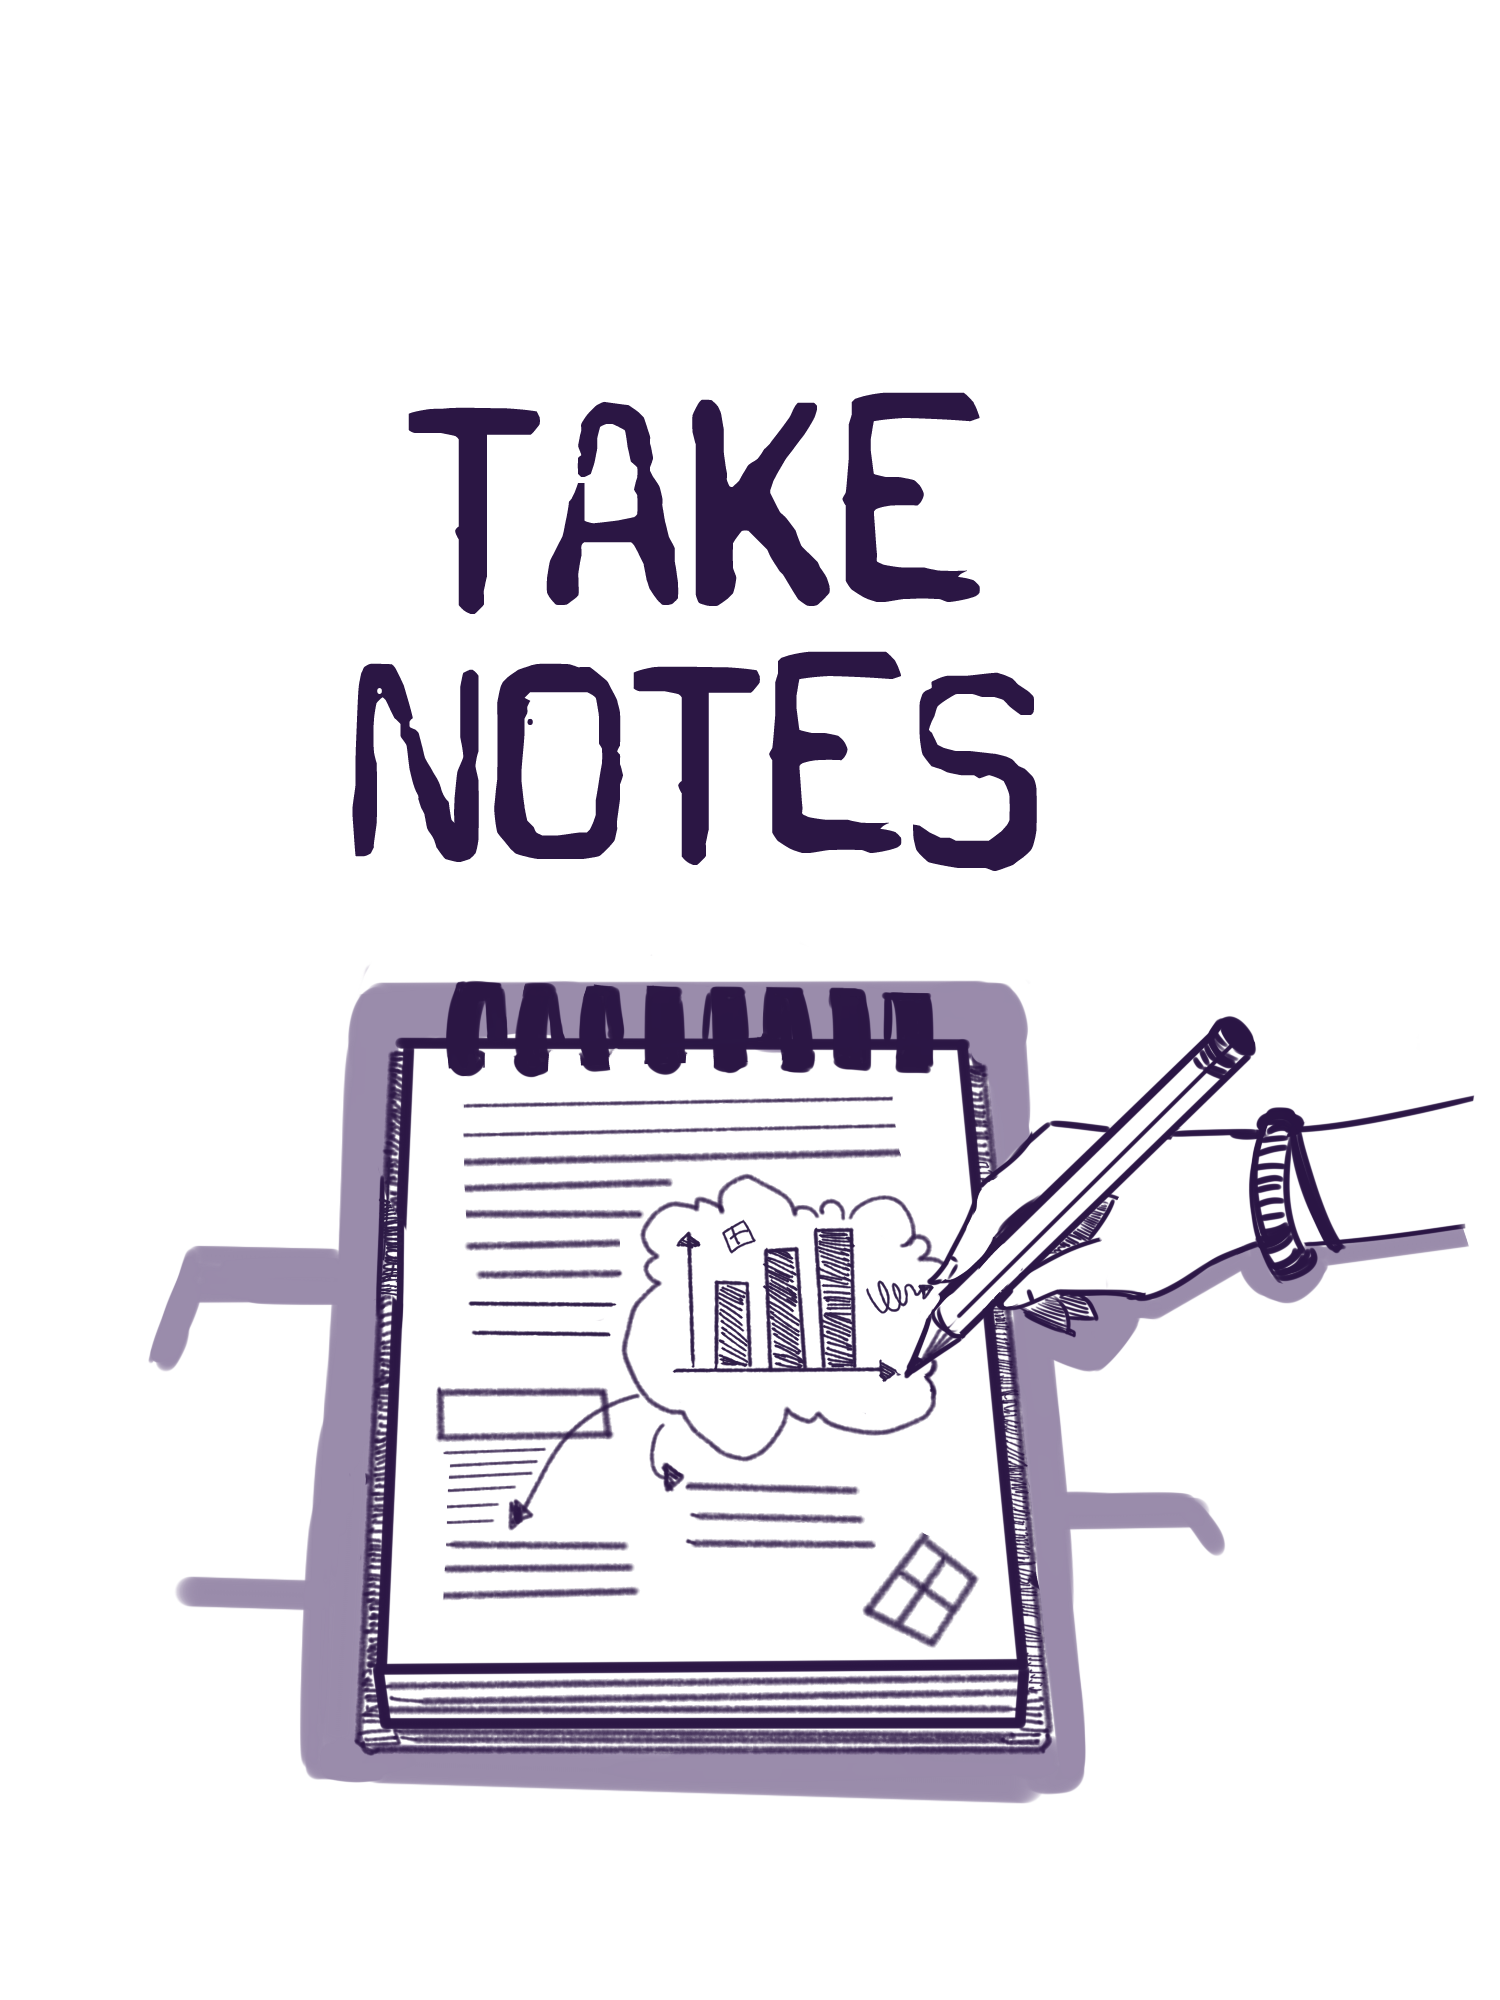 12 Tips to Improve Your Reading–Tip 11: Take Notes